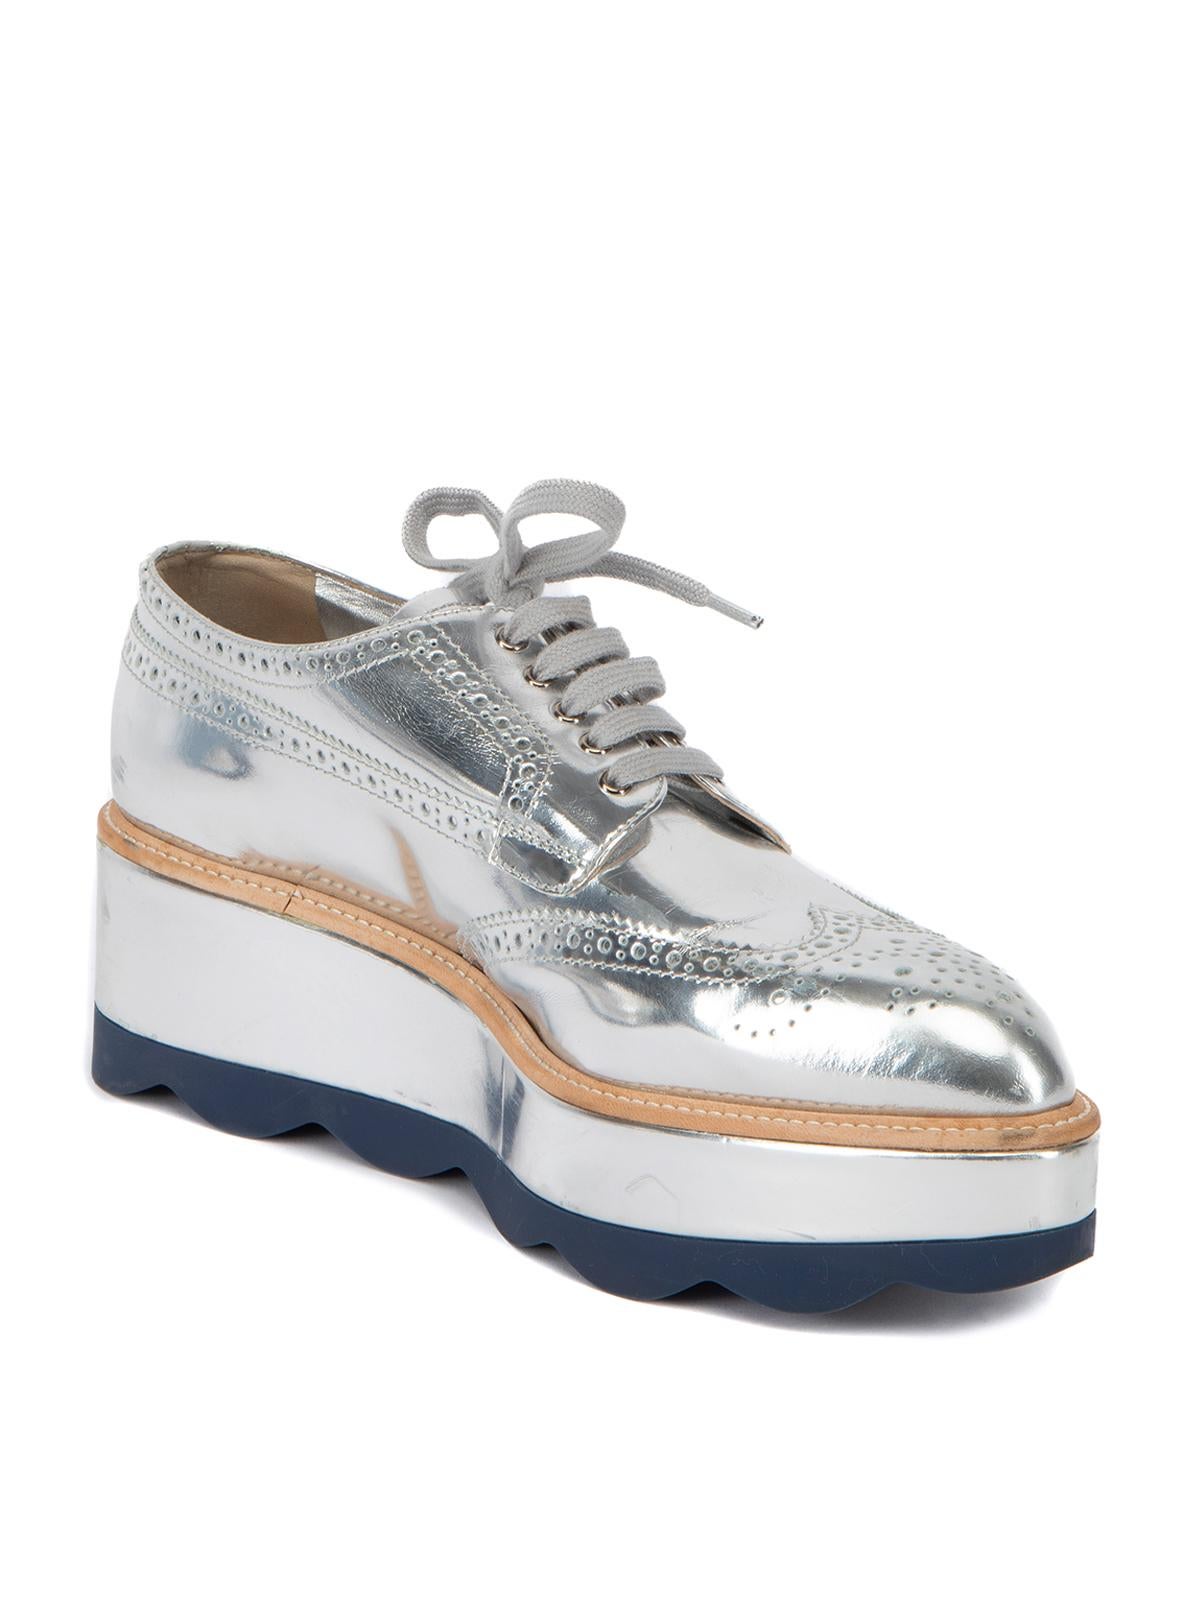 CONDITION is Very good. Minimal wear to shoes is evident. Minimal scuffs and crease marks to the exterior on this used Prada designer resale item. This item comes with the original dustbag and shoebox. Details Metallic Silver Patent leather Brogue